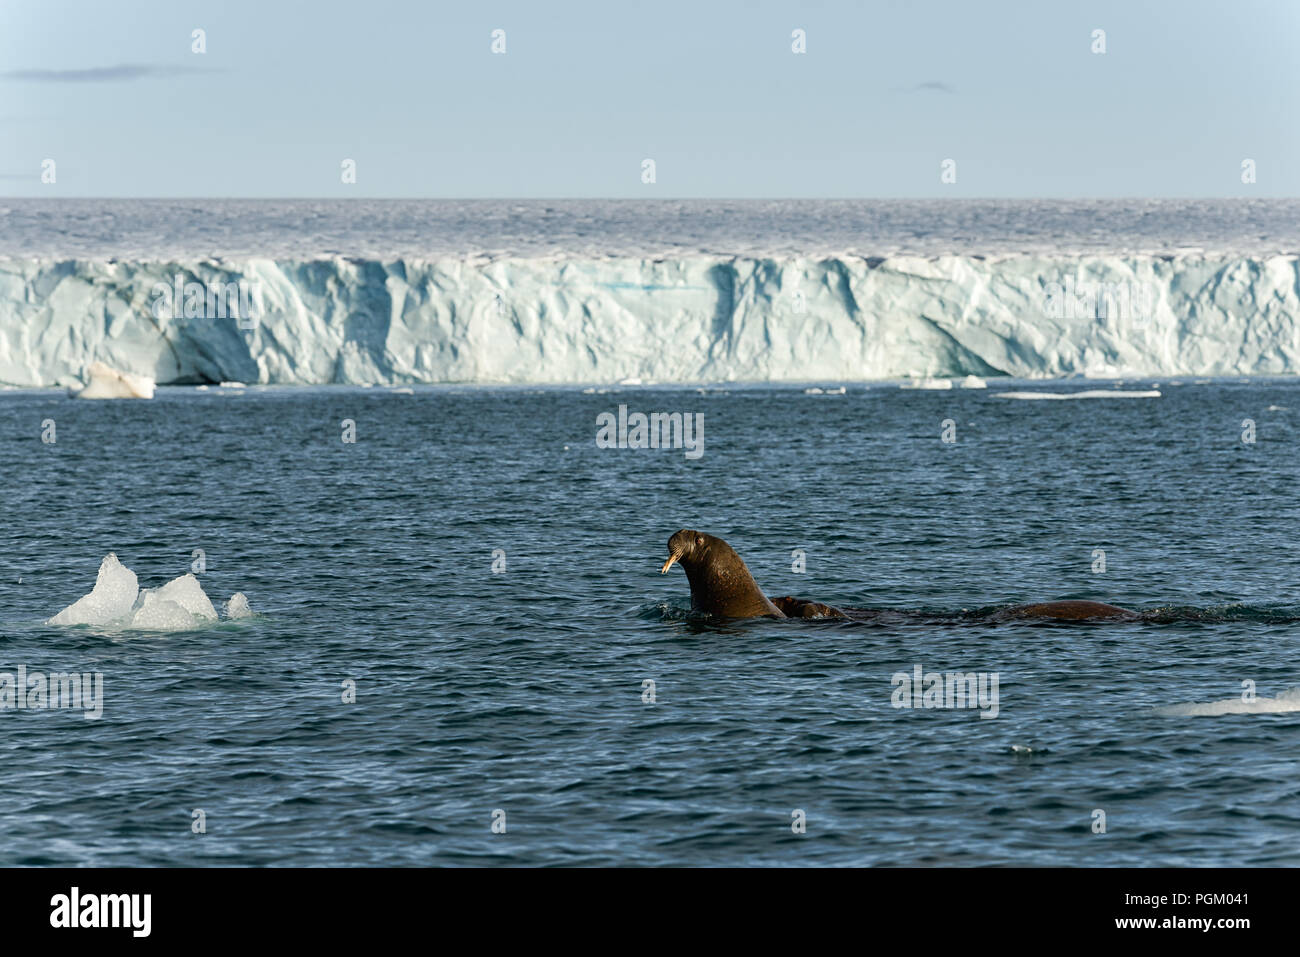 Group of walruses swimming in sea in front of the glacier Bråsvellbreen, Austfonna ice cap, Nordaustlandet, Svalbard Archipelago, Norway Stock Photo